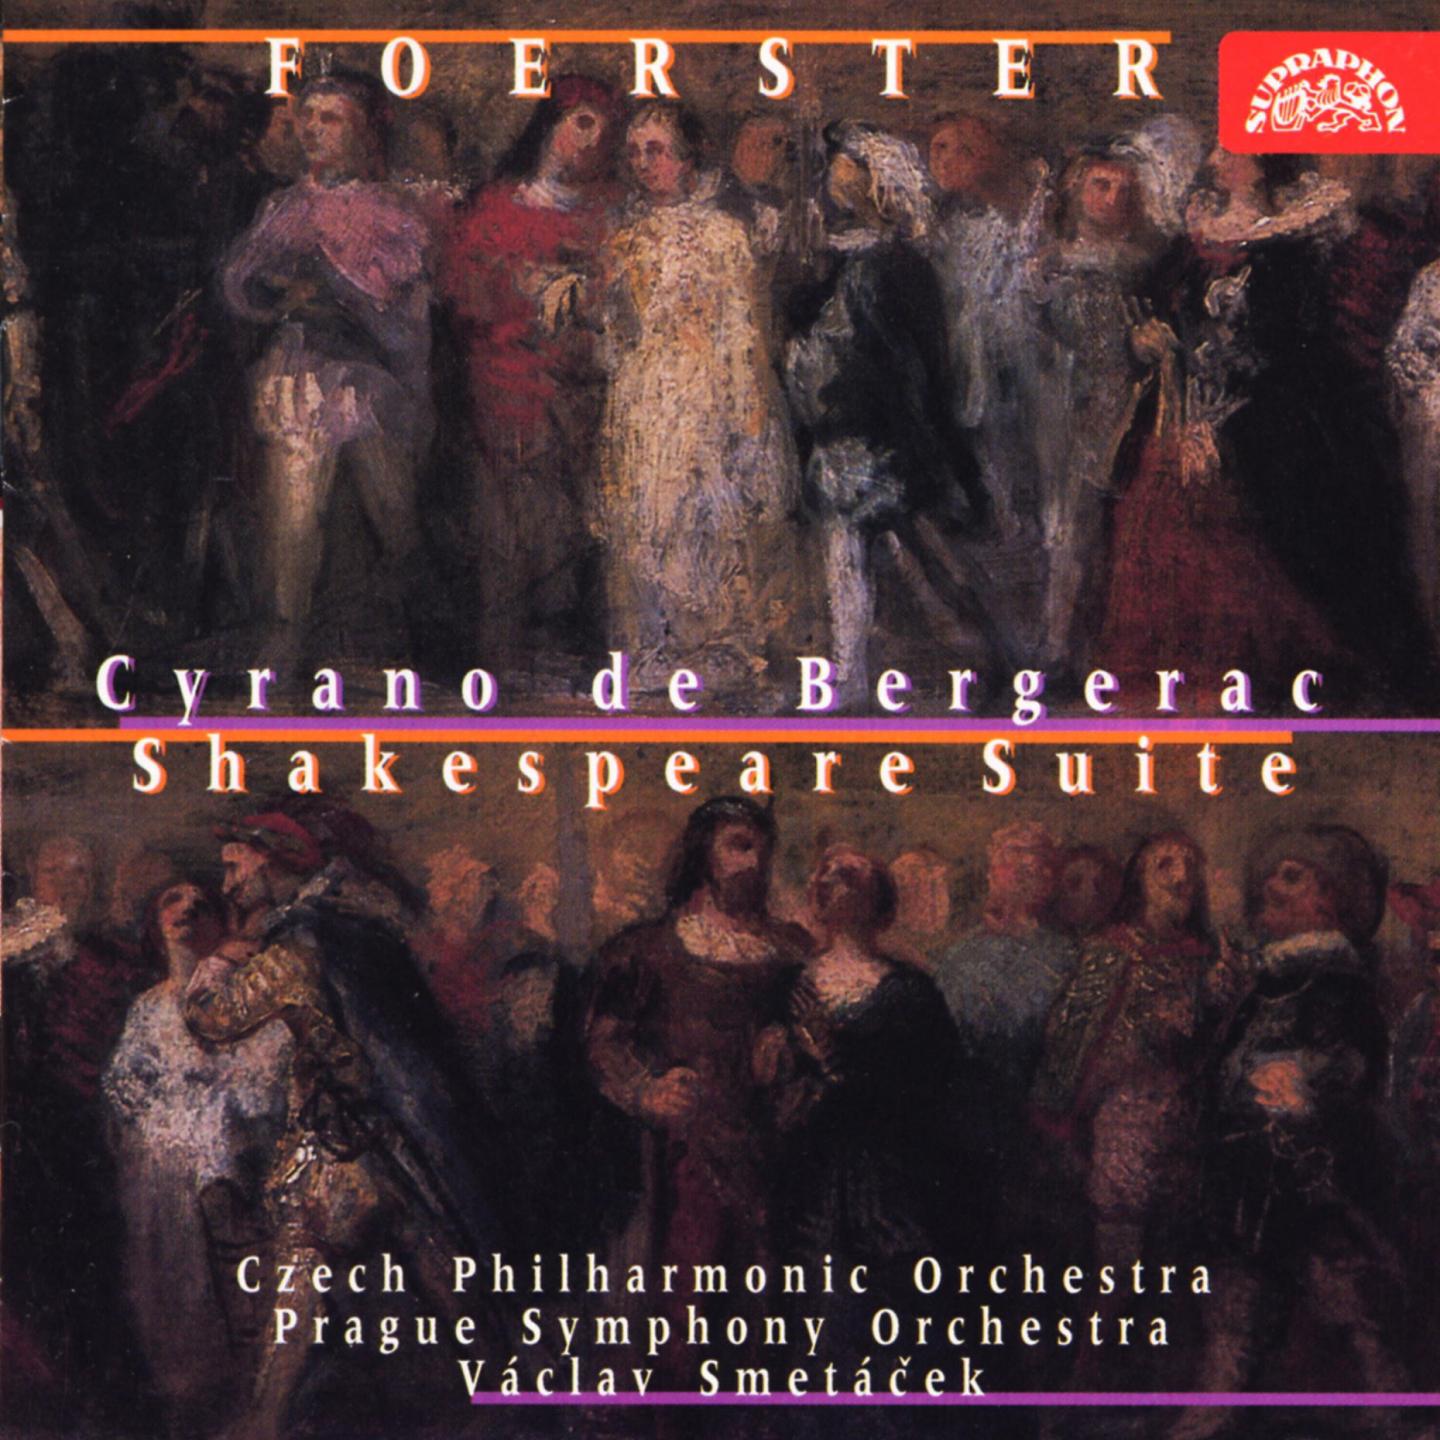 Shakespeare Suite for Large Orchestra, Op. 76, .: Katharina, Petruchio and Eros - Allegro energico